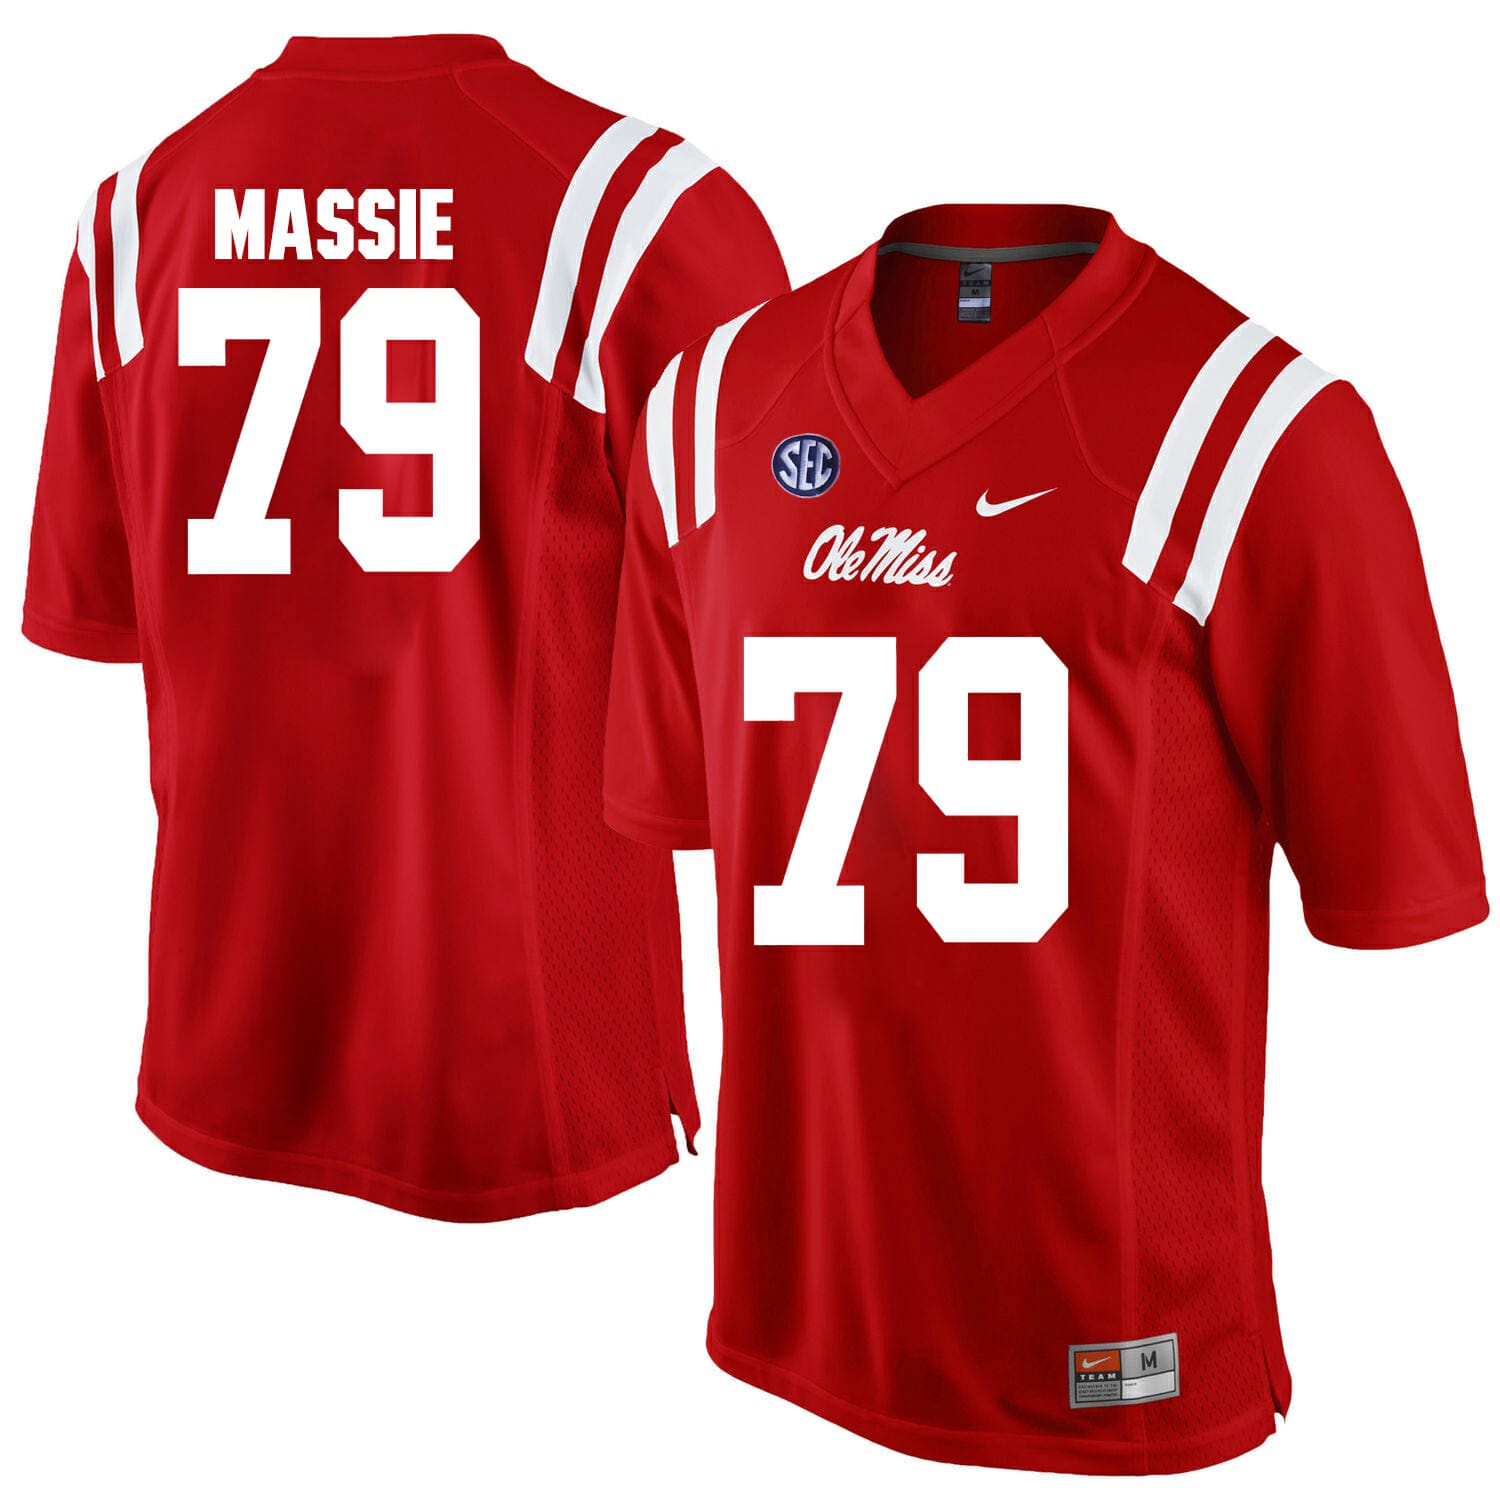 NCAA Football Jersey Ole Miss Rebels #79 Bobby Massie College Red